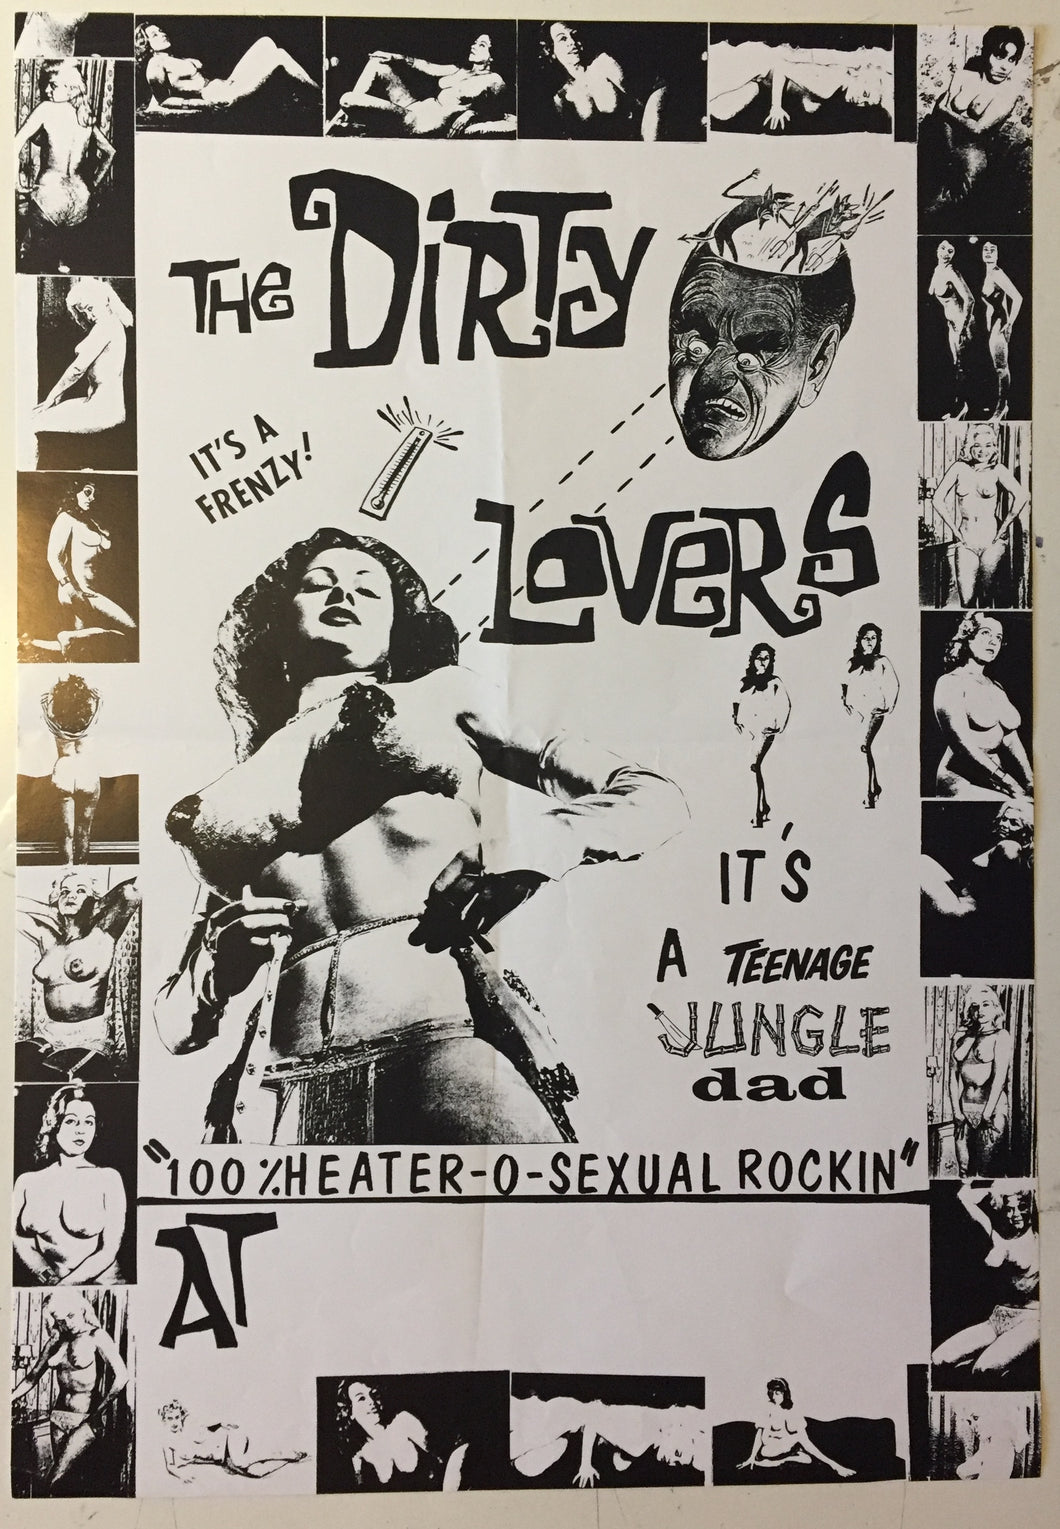 DIRTY LOVERS - DIRTY LOVERS (1990 USED) POSTER